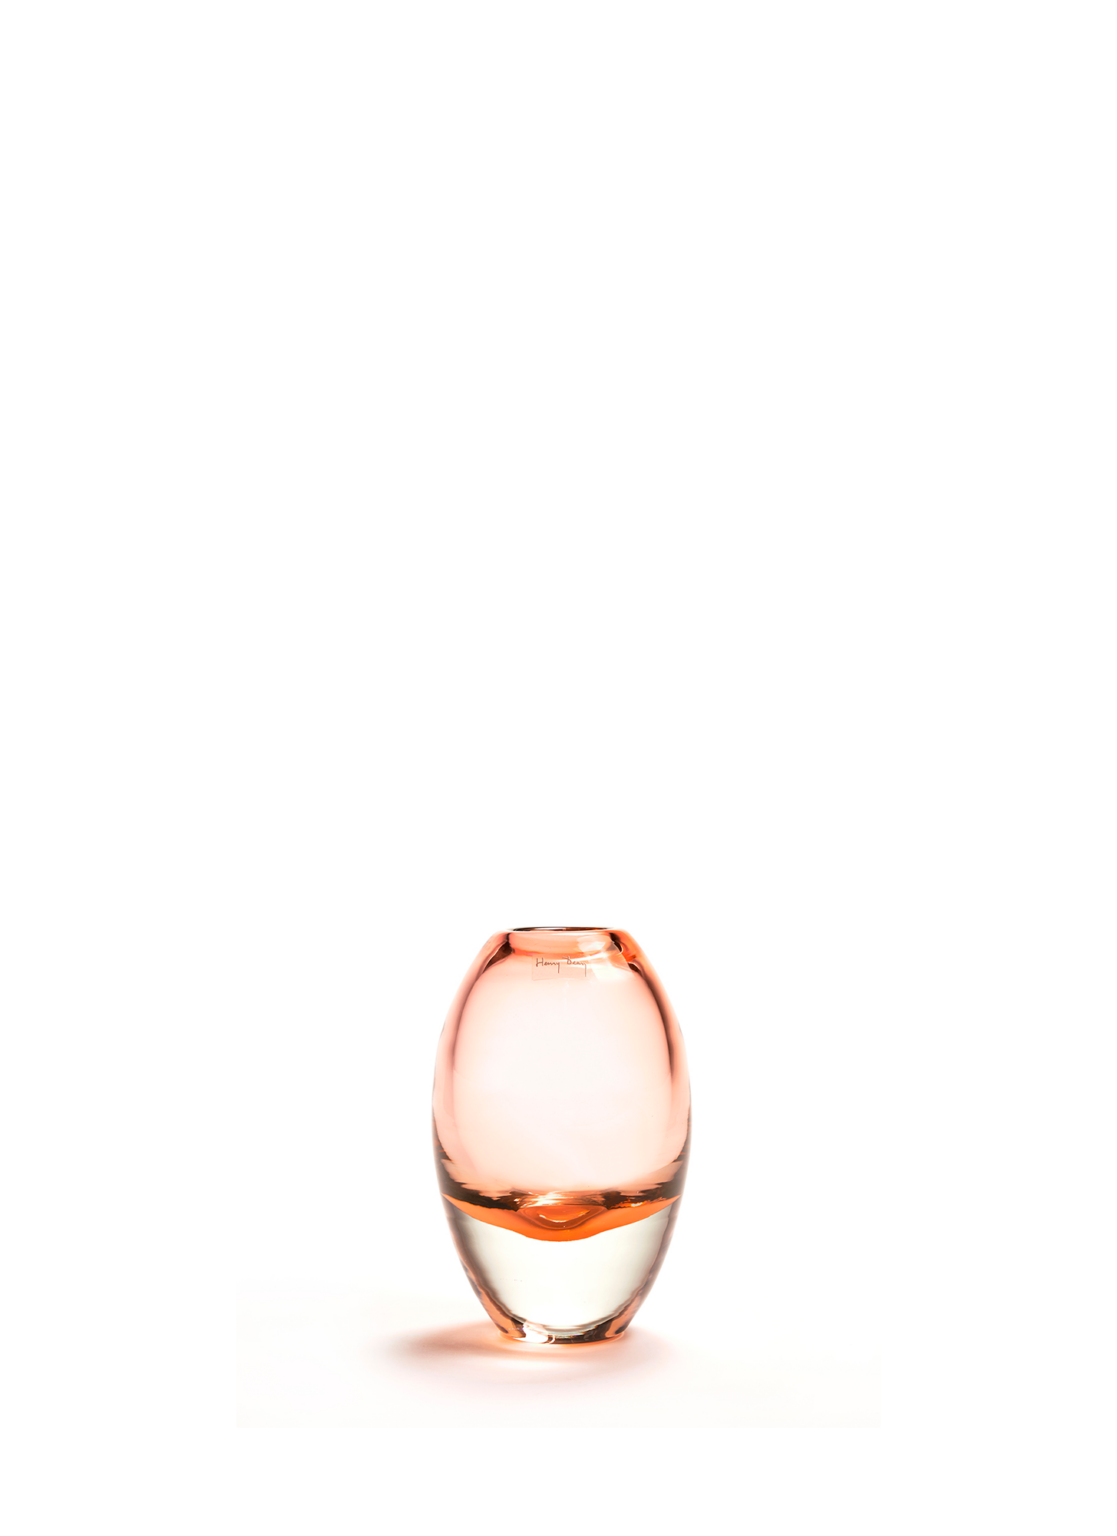 Oval shaped handmade glass vase in a salmon color